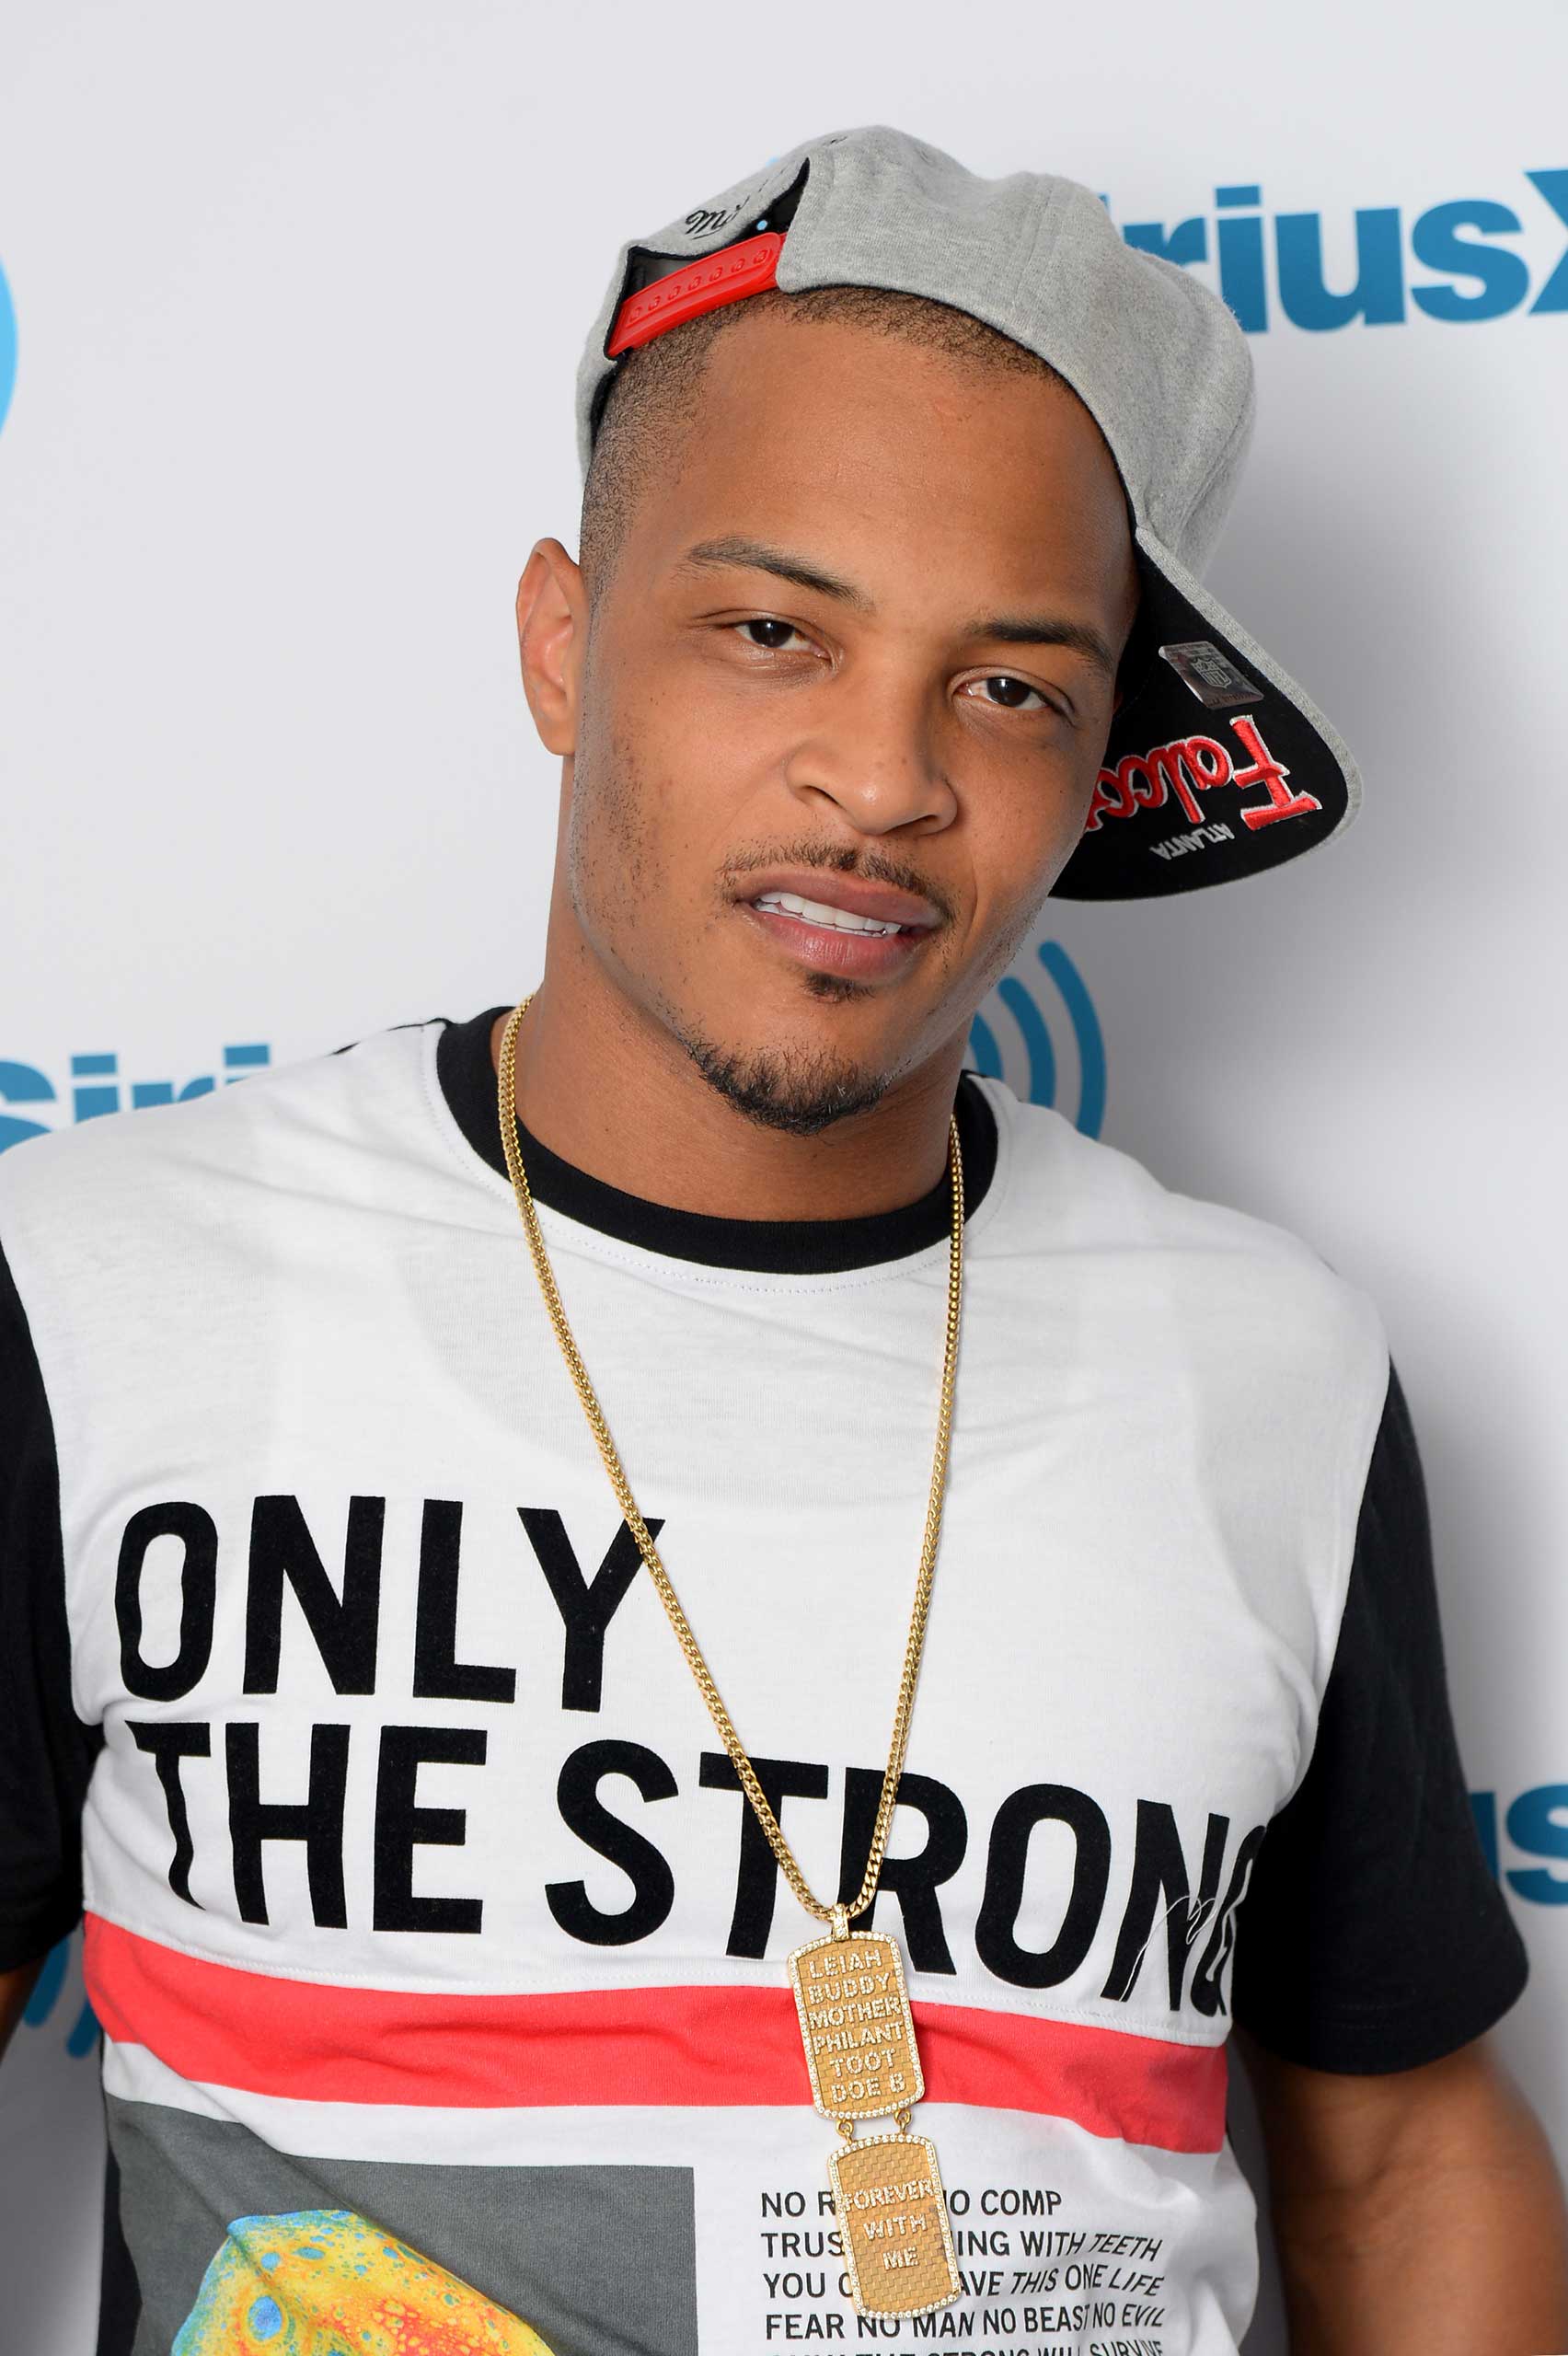 Rapper T.I. visits SiriusXM Studios in New York City, on Sept. 16, 2015. (Andrew Toth—Getty Images)